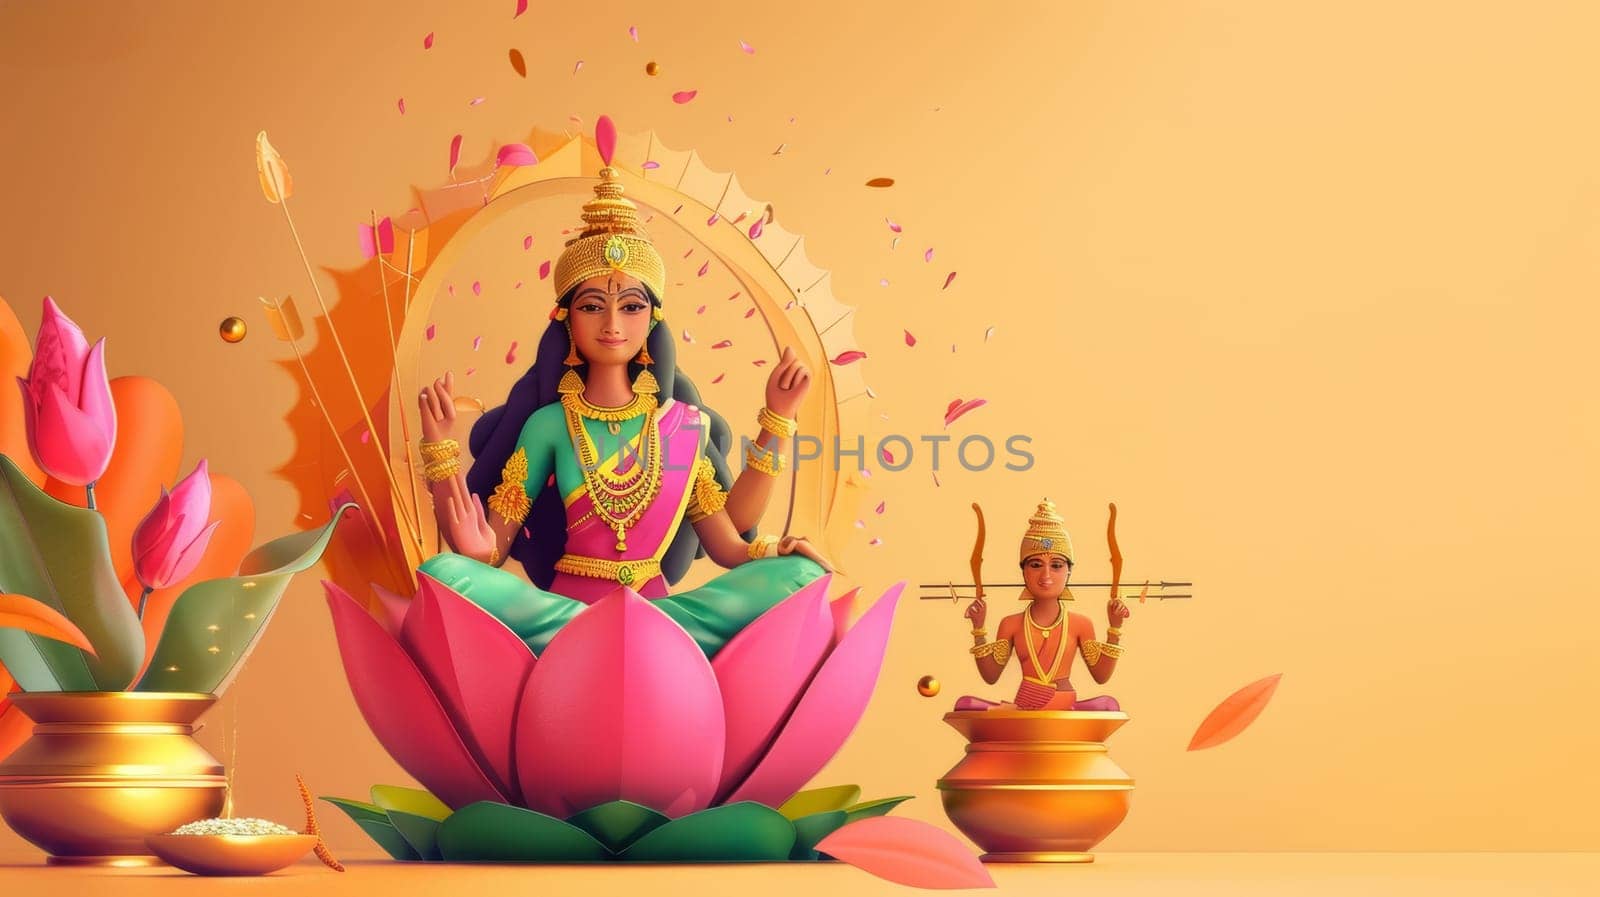 A festive illustration for Akshaya Tritiya showing Goddess Lakshmi on a lotus with gold accents, epitomizing wealth and well-being. Banner with copy space.